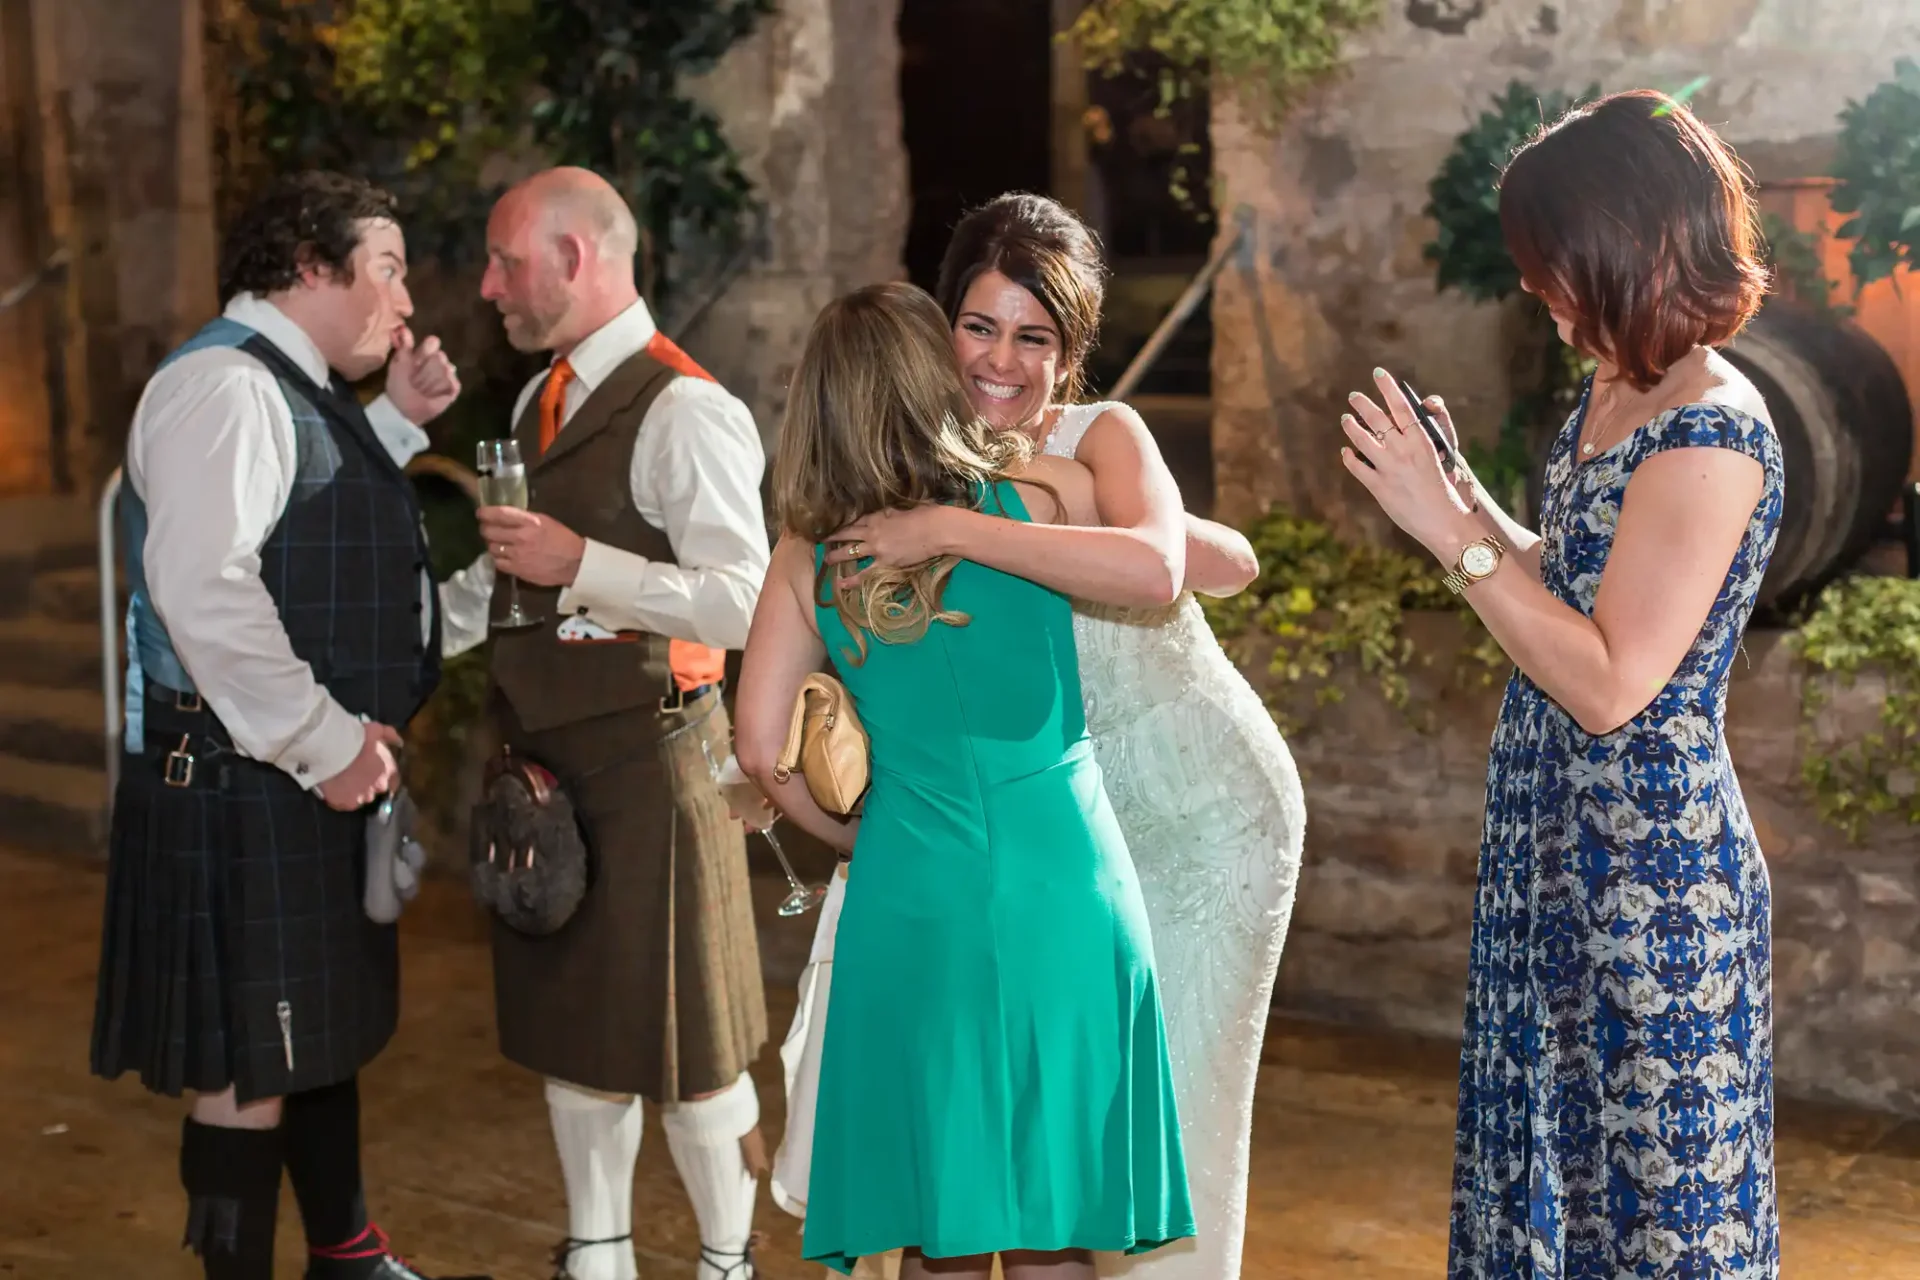 A joyful bride in a white dress hugs a woman in a green dress at an evening reception with three other guests smiling and conversing in the background.